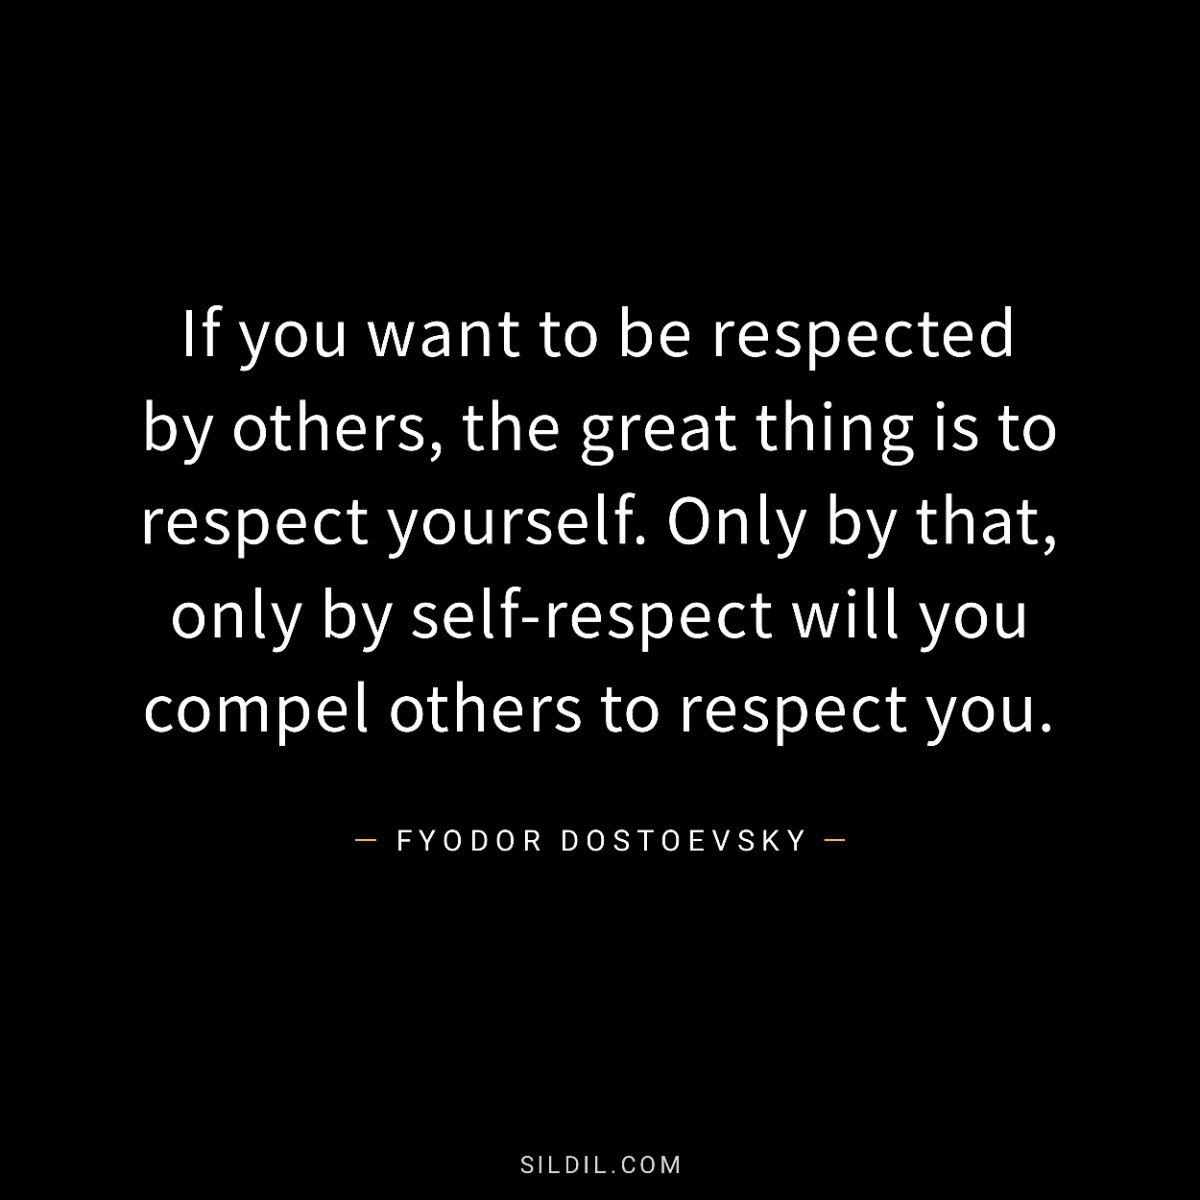 If you want to be respected by others, the great thing is to respect yourself. Only by that, only by self-respect will you compel others to respect you.